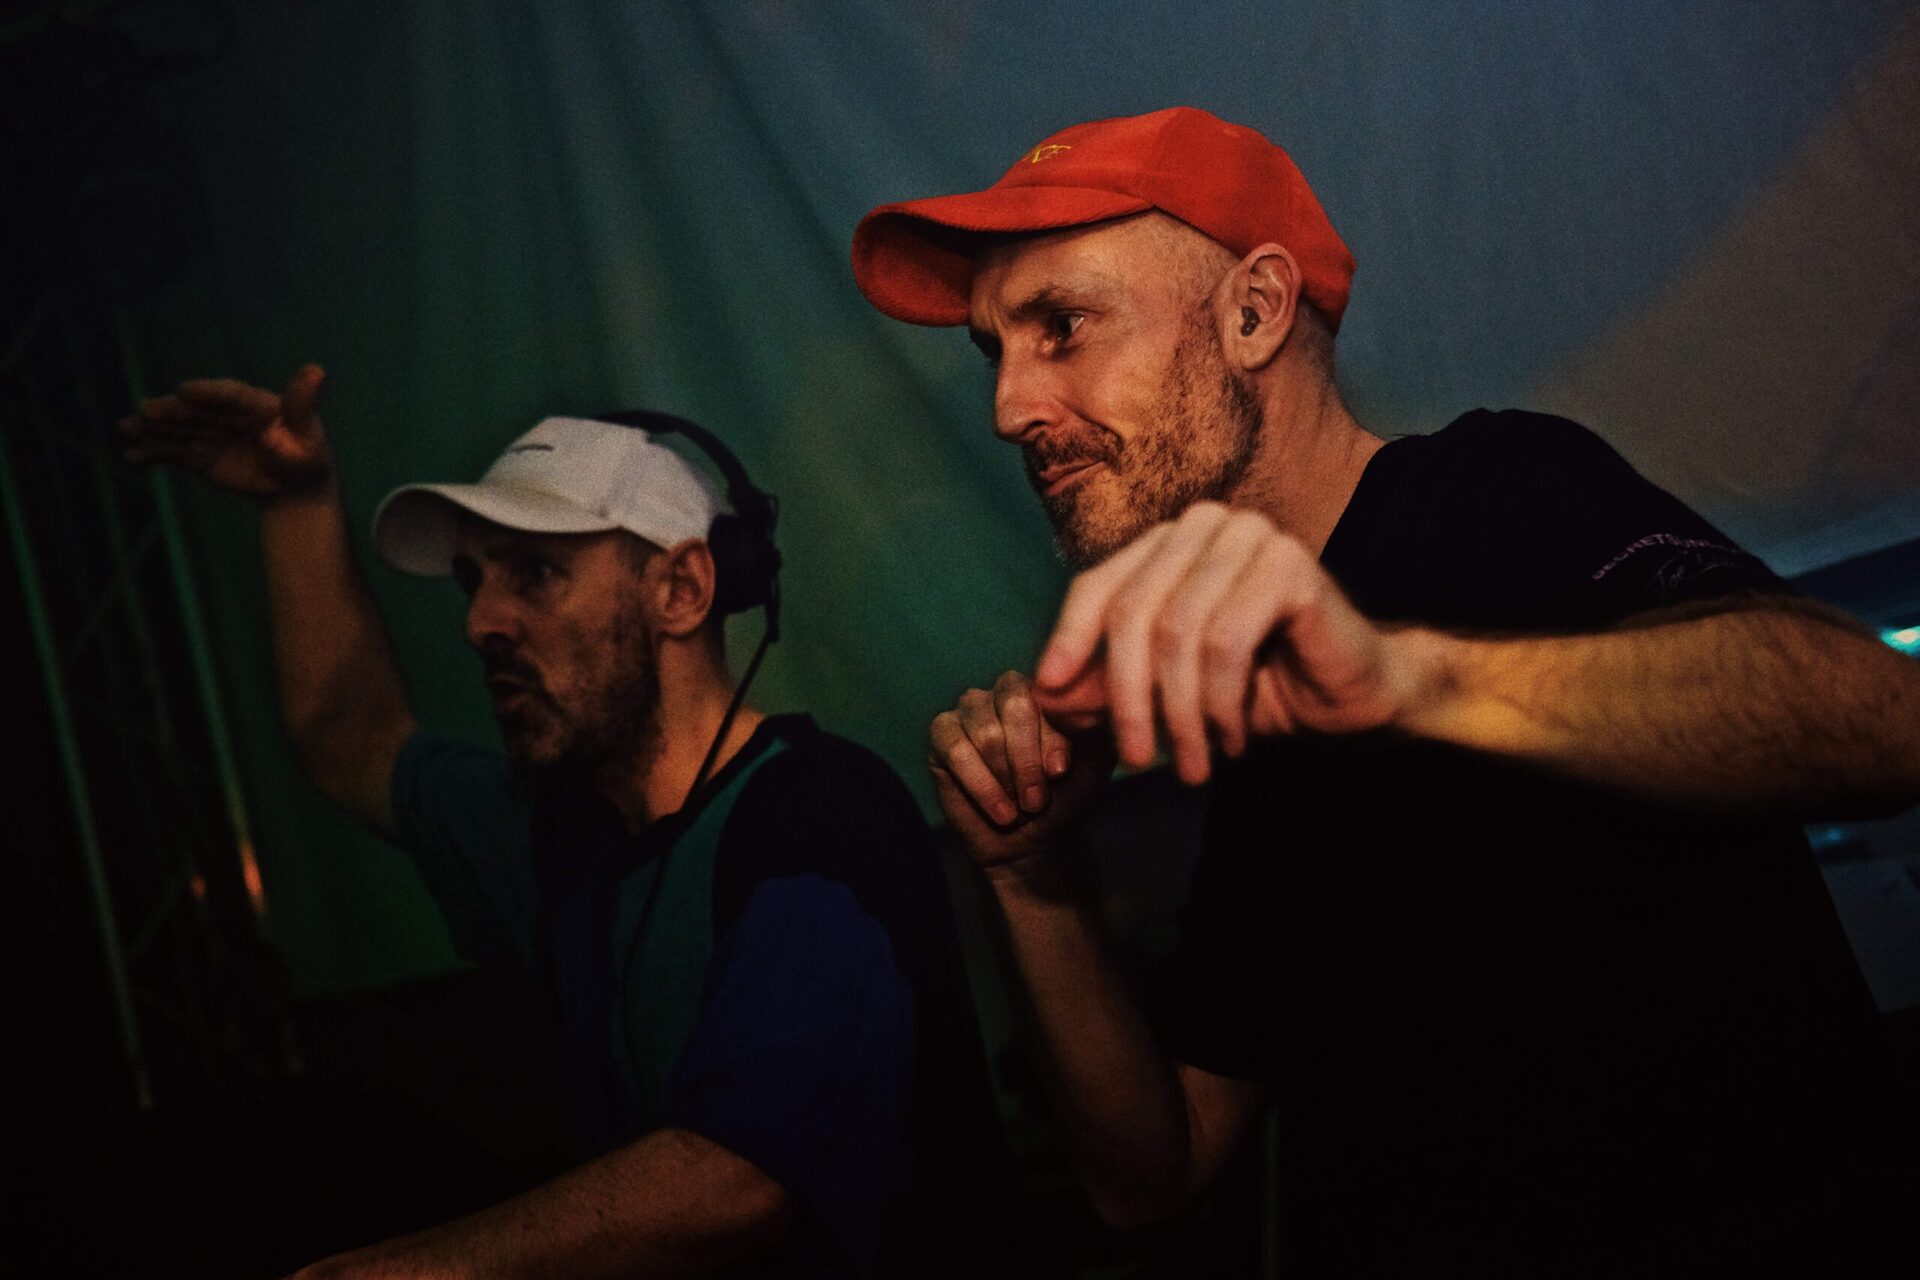 Did your hear about Secretsundaze’s birthday party?